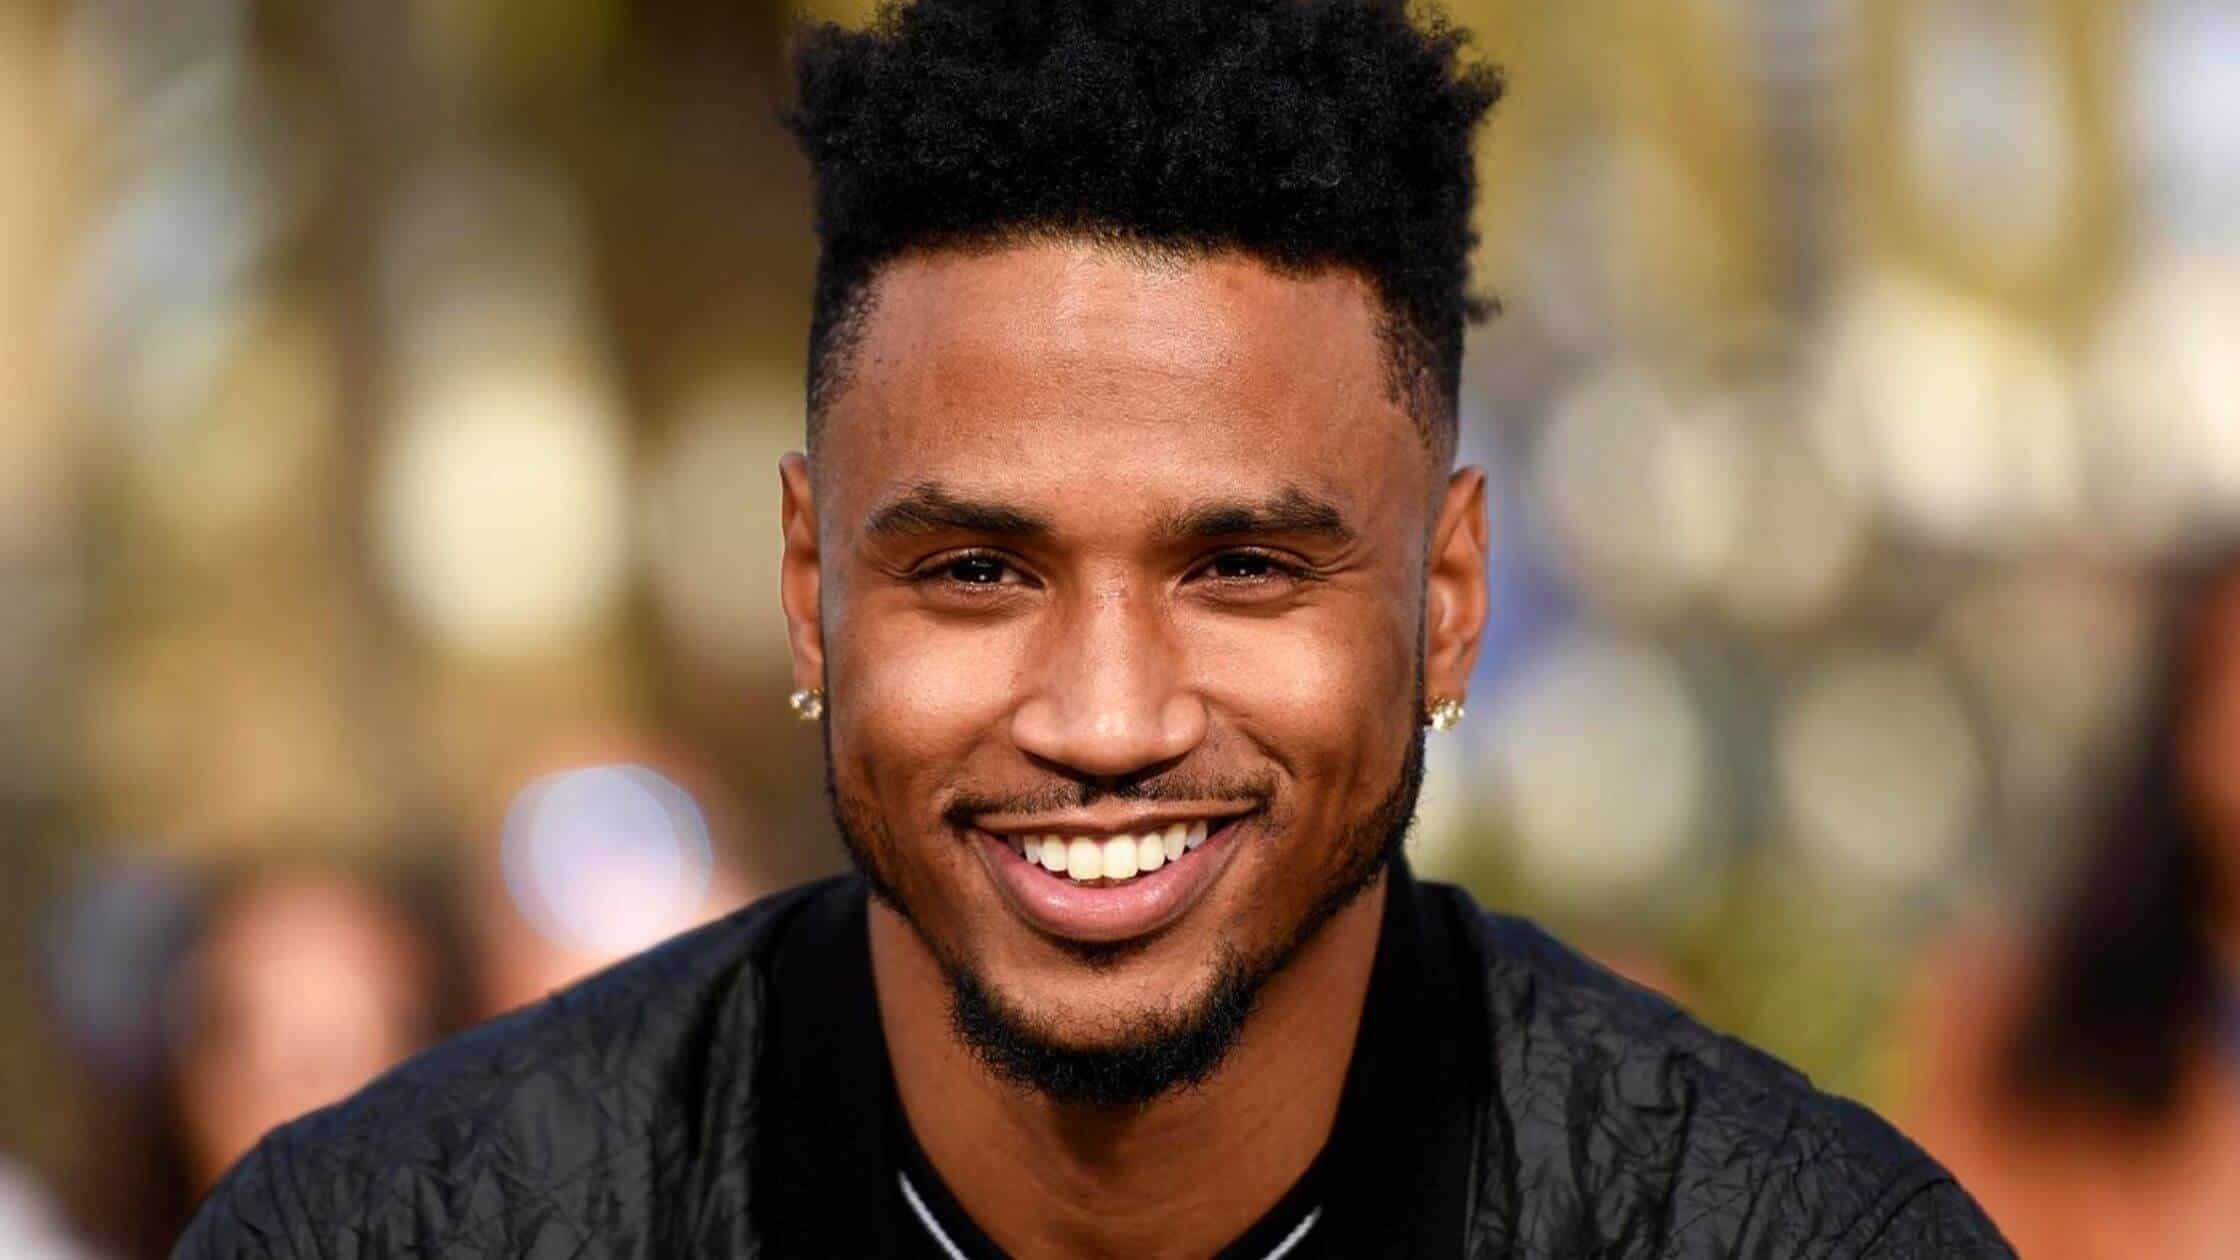 Trey Songz's Net Worth, Height, Wife, Kids, Relationship, Age, Career